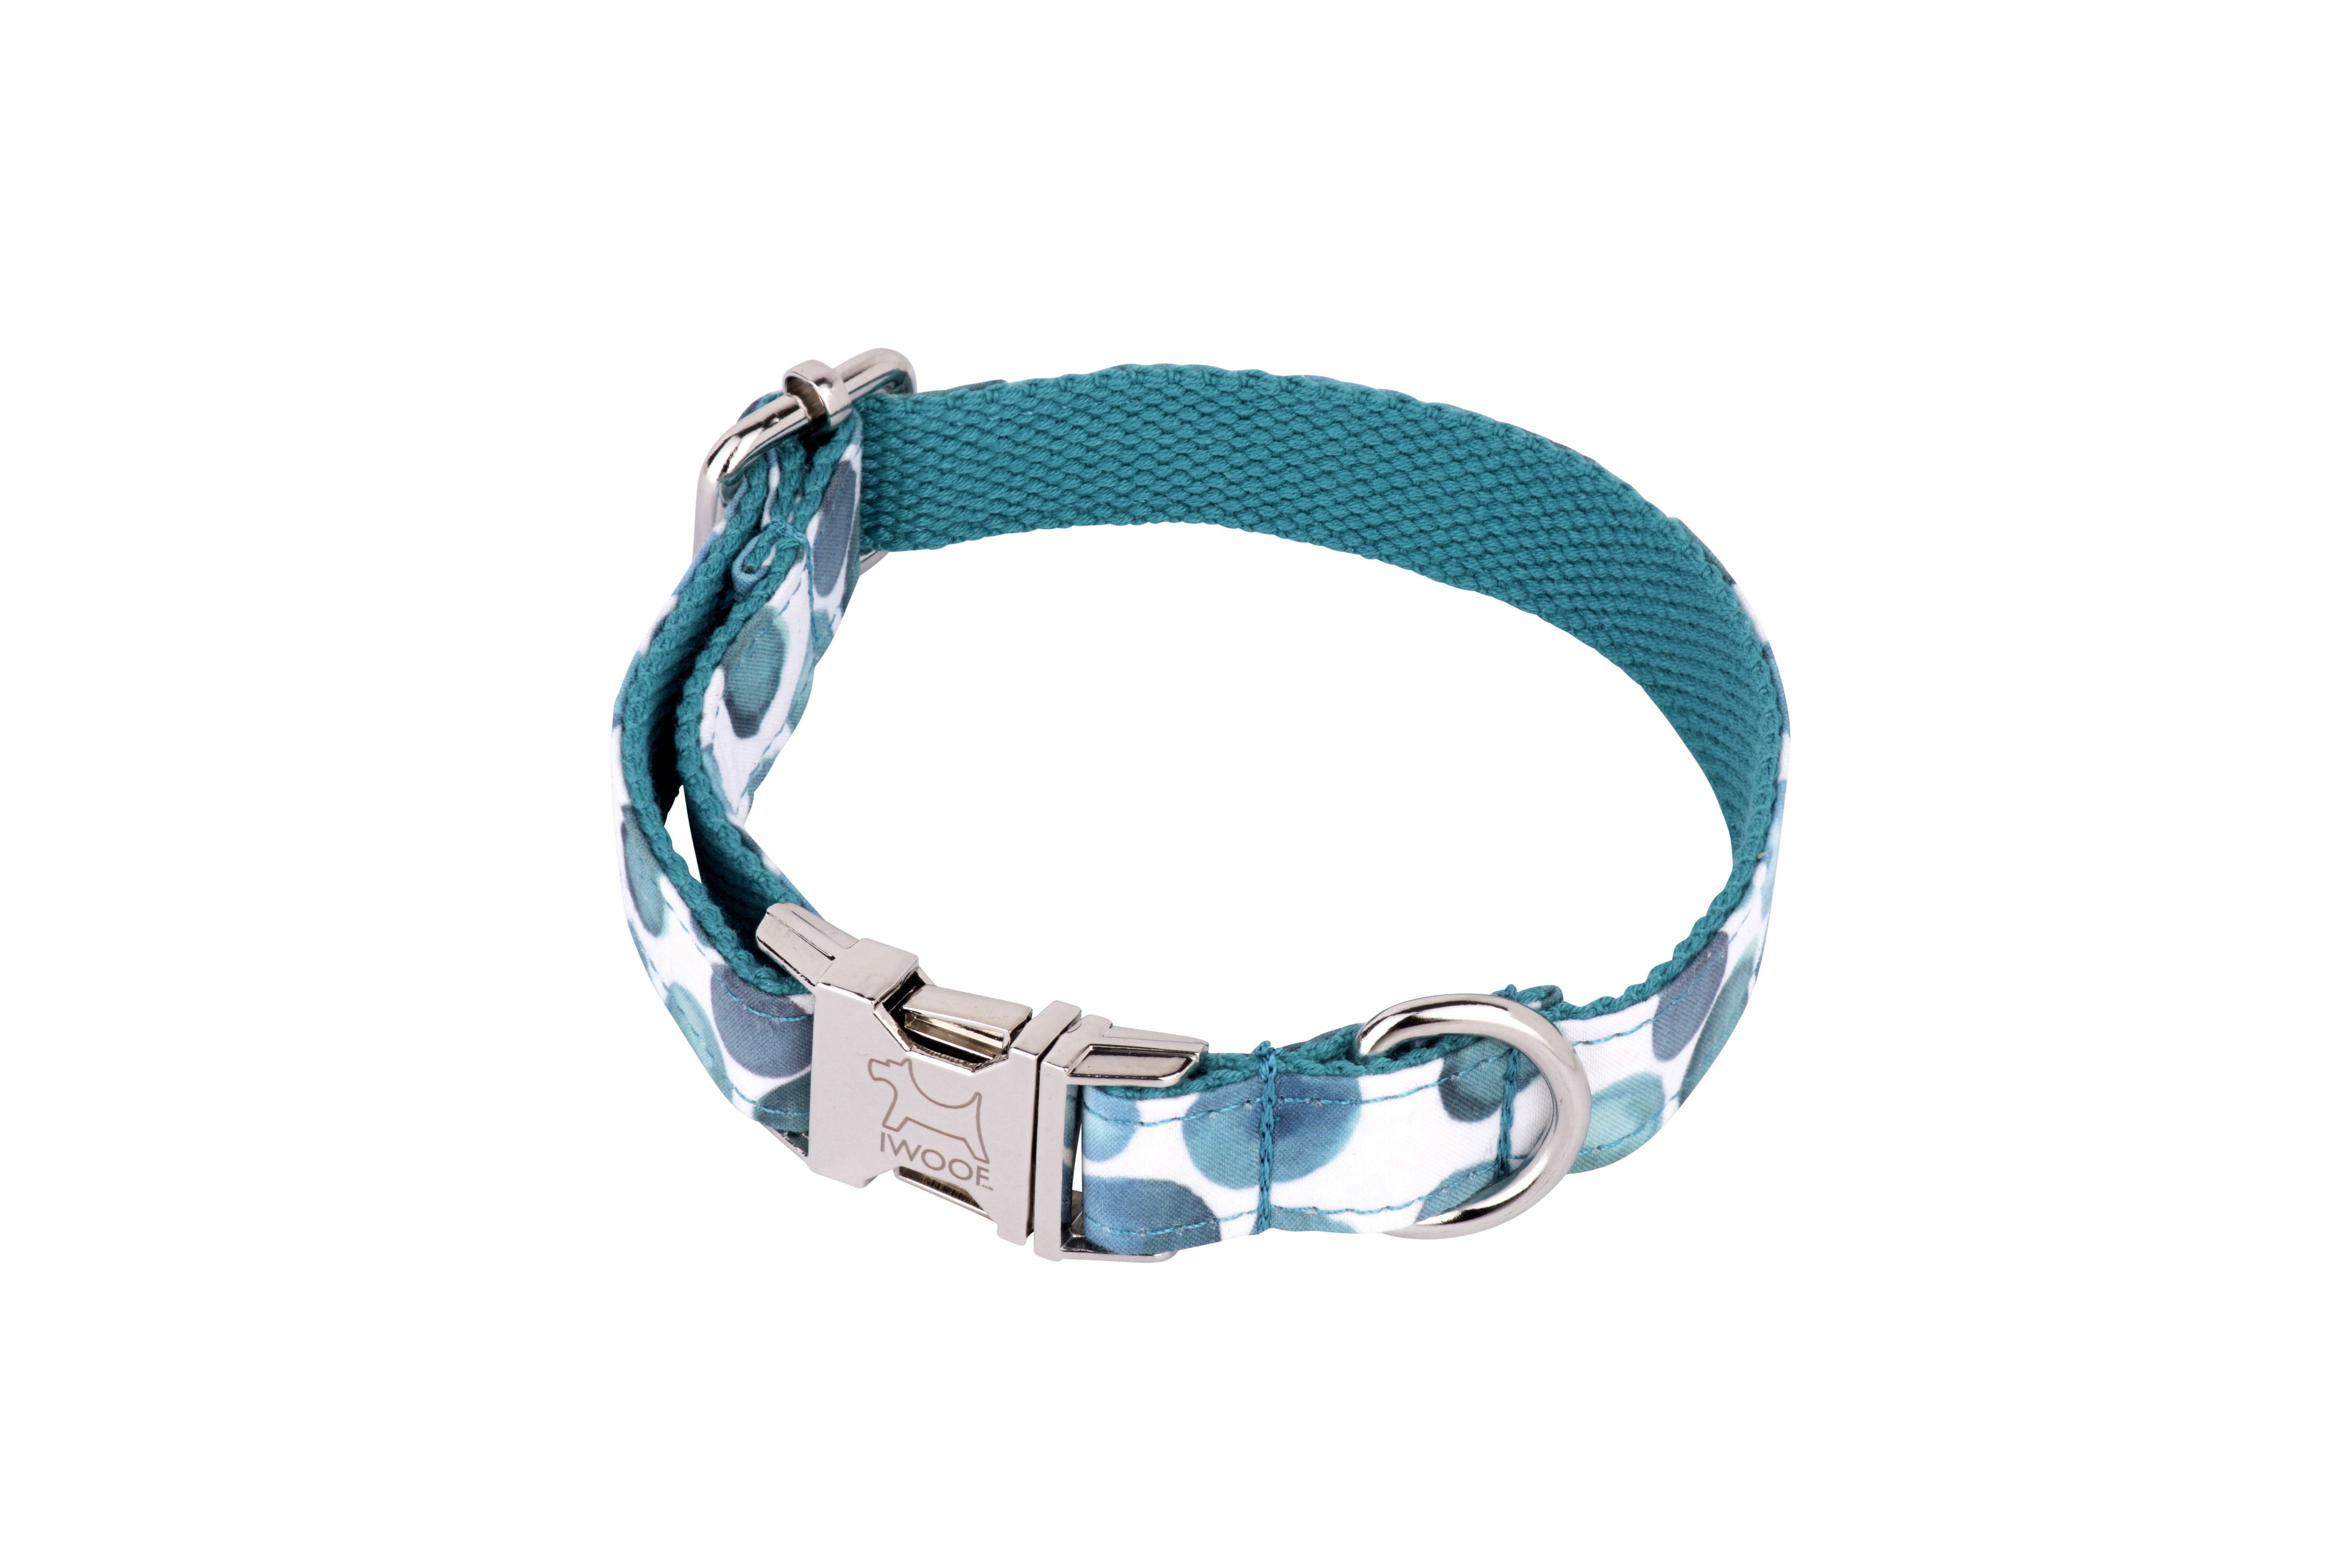 Bubbles designer dog collar and designer dog lead by IWOOF